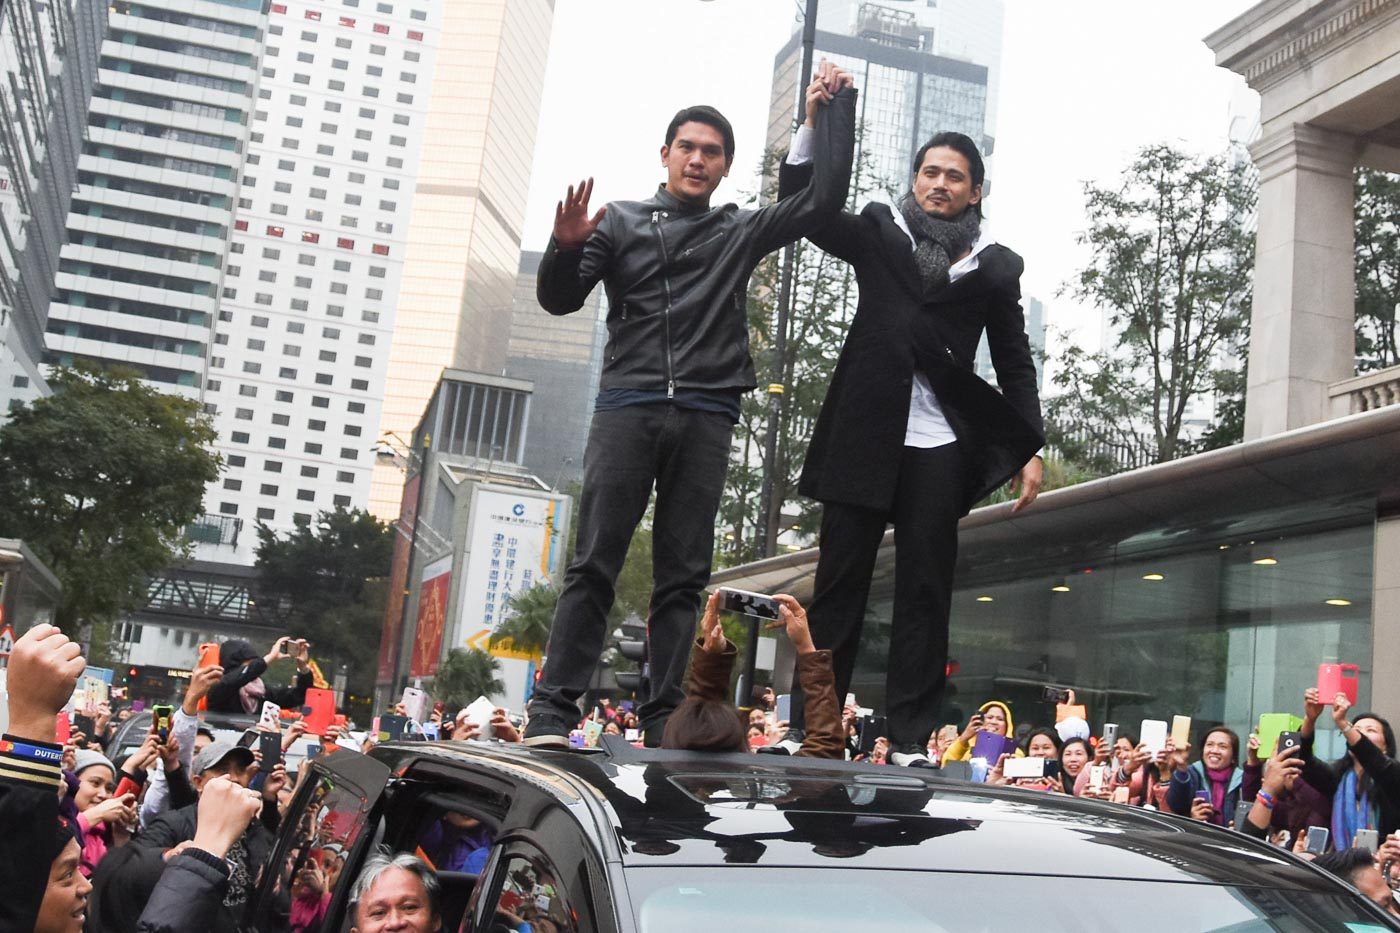 BAD BOY MEETS BAD BOY. Baste with Robin Padilla campaigning for Mayor Duterte in Hongkong for OFW votes. Photo by Edwin Espejo/Rappler  